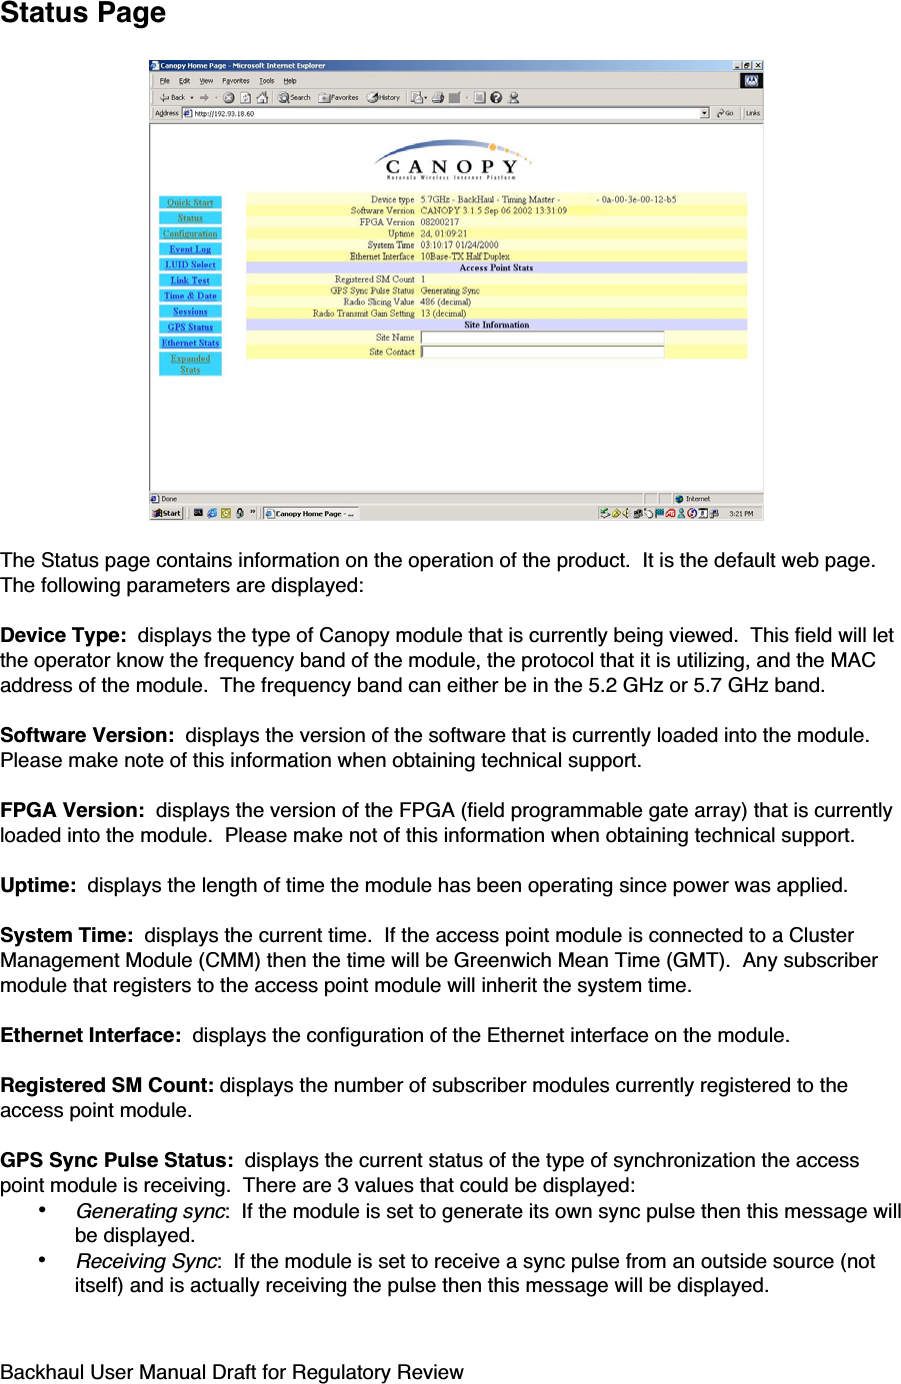 Backhaul User Manual Draft for Regulatory ReviewStatus PageThe Status page contains information on the operation of the product.  It is the default web page.The following parameters are displayed:Device Type:  displays the type of Canopy module that is currently being viewed.  This field will letthe operator know the frequency band of the module, the protocol that it is utilizing, and the MACaddress of the module.  The frequency band can either be in the 5.2 GHz or 5.7 GHz band.Software Version:  displays the version of the software that is currently loaded into the module.Please make note of this information when obtaining technical support.FPGA Version:  displays the version of the FPGA (field programmable gate array) that is currentlyloaded into the module.  Please make not of this information when obtaining technical support.Uptime:  displays the length of time the module has been operating since power was applied.System Time:  displays the current time.  If the access point module is connected to a ClusterManagement Module (CMM) then the time will be Greenwich Mean Time (GMT).  Any subscribermodule that registers to the access point module will inherit the system time.Ethernet Interface:  displays the configuration of the Ethernet interface on the module.Registered SM Count: displays the number of subscriber modules currently registered to theaccess point module.GPS Sync Pulse Status:  displays the current status of the type of synchronization the accesspoint module is receiving.  There are 3 values that could be displayed:• Generating sync:  If the module is set to generate its own sync pulse then this message willbe displayed.• Receiving Sync:  If the module is set to receive a sync pulse from an outside source (notitself) and is actually receiving the pulse then this message will be displayed.